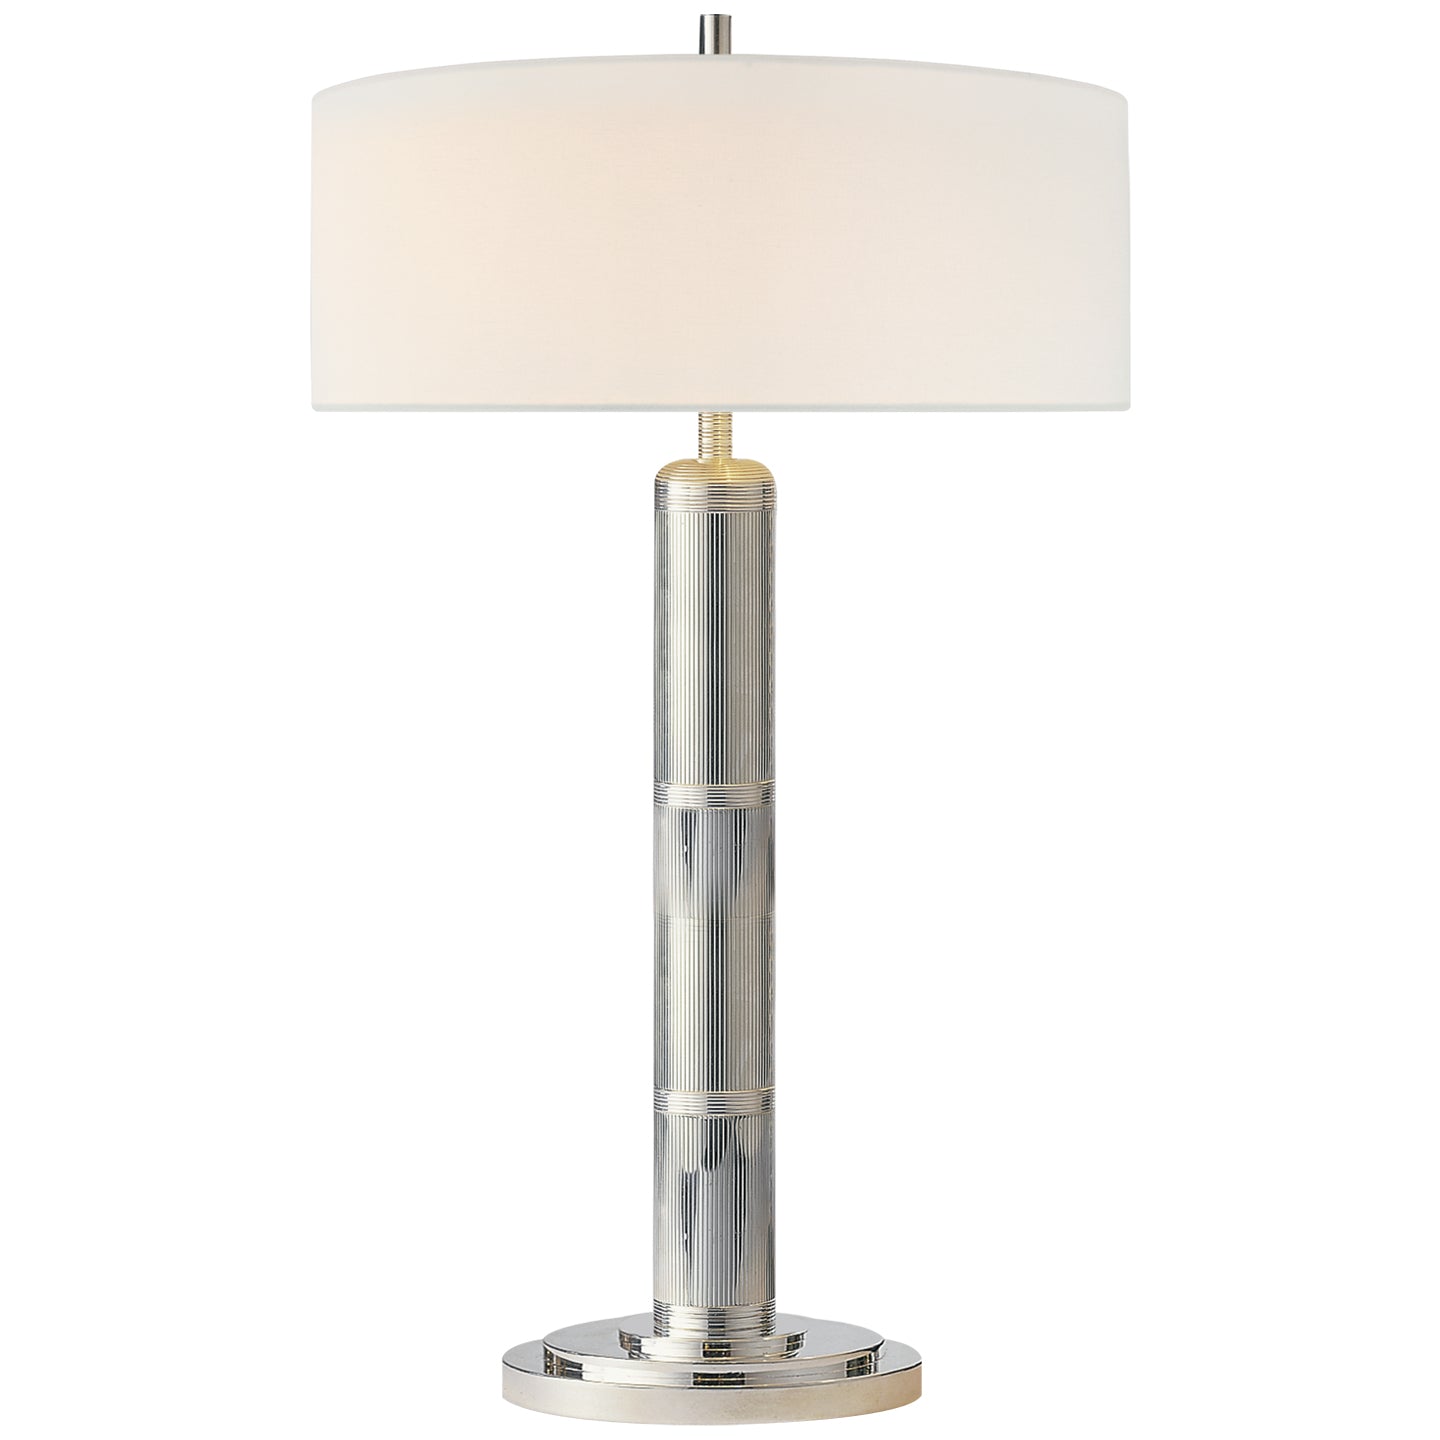  This high table lamp is a perfect decorative element to set up the ambiance. Amethyst Home provides interior design services, furniture, rugs, and lighting in the Miami metro area.